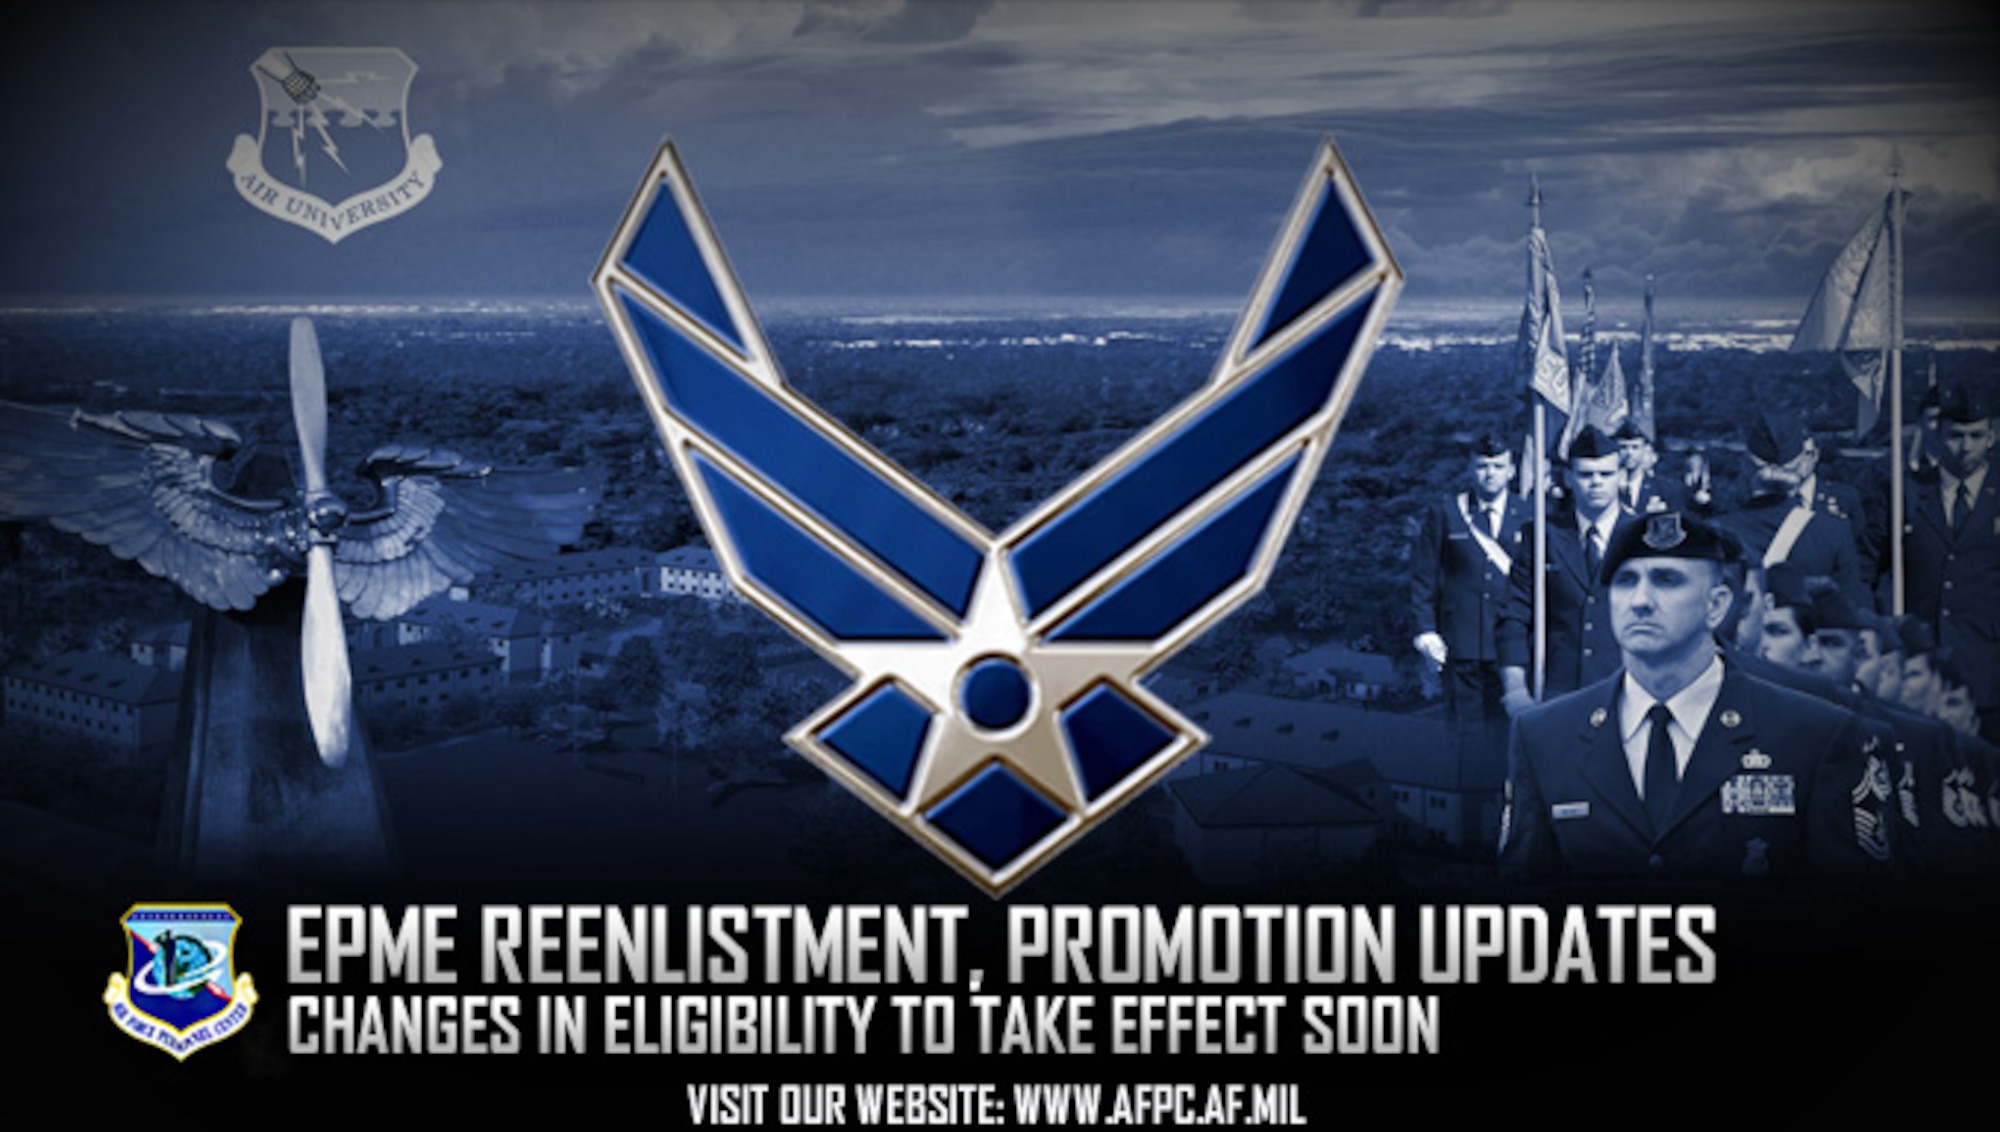 Airmen have 12 months from notification to complete their enlisted professional military education distance learning course. Airmen notified in 2015 need to complete their EPME DL courses by the new policy implementation date or they will be ineligible to reenlist, extend or promote. (U.S. Air Force graphic by Staff Sgt. Alexx Pons)